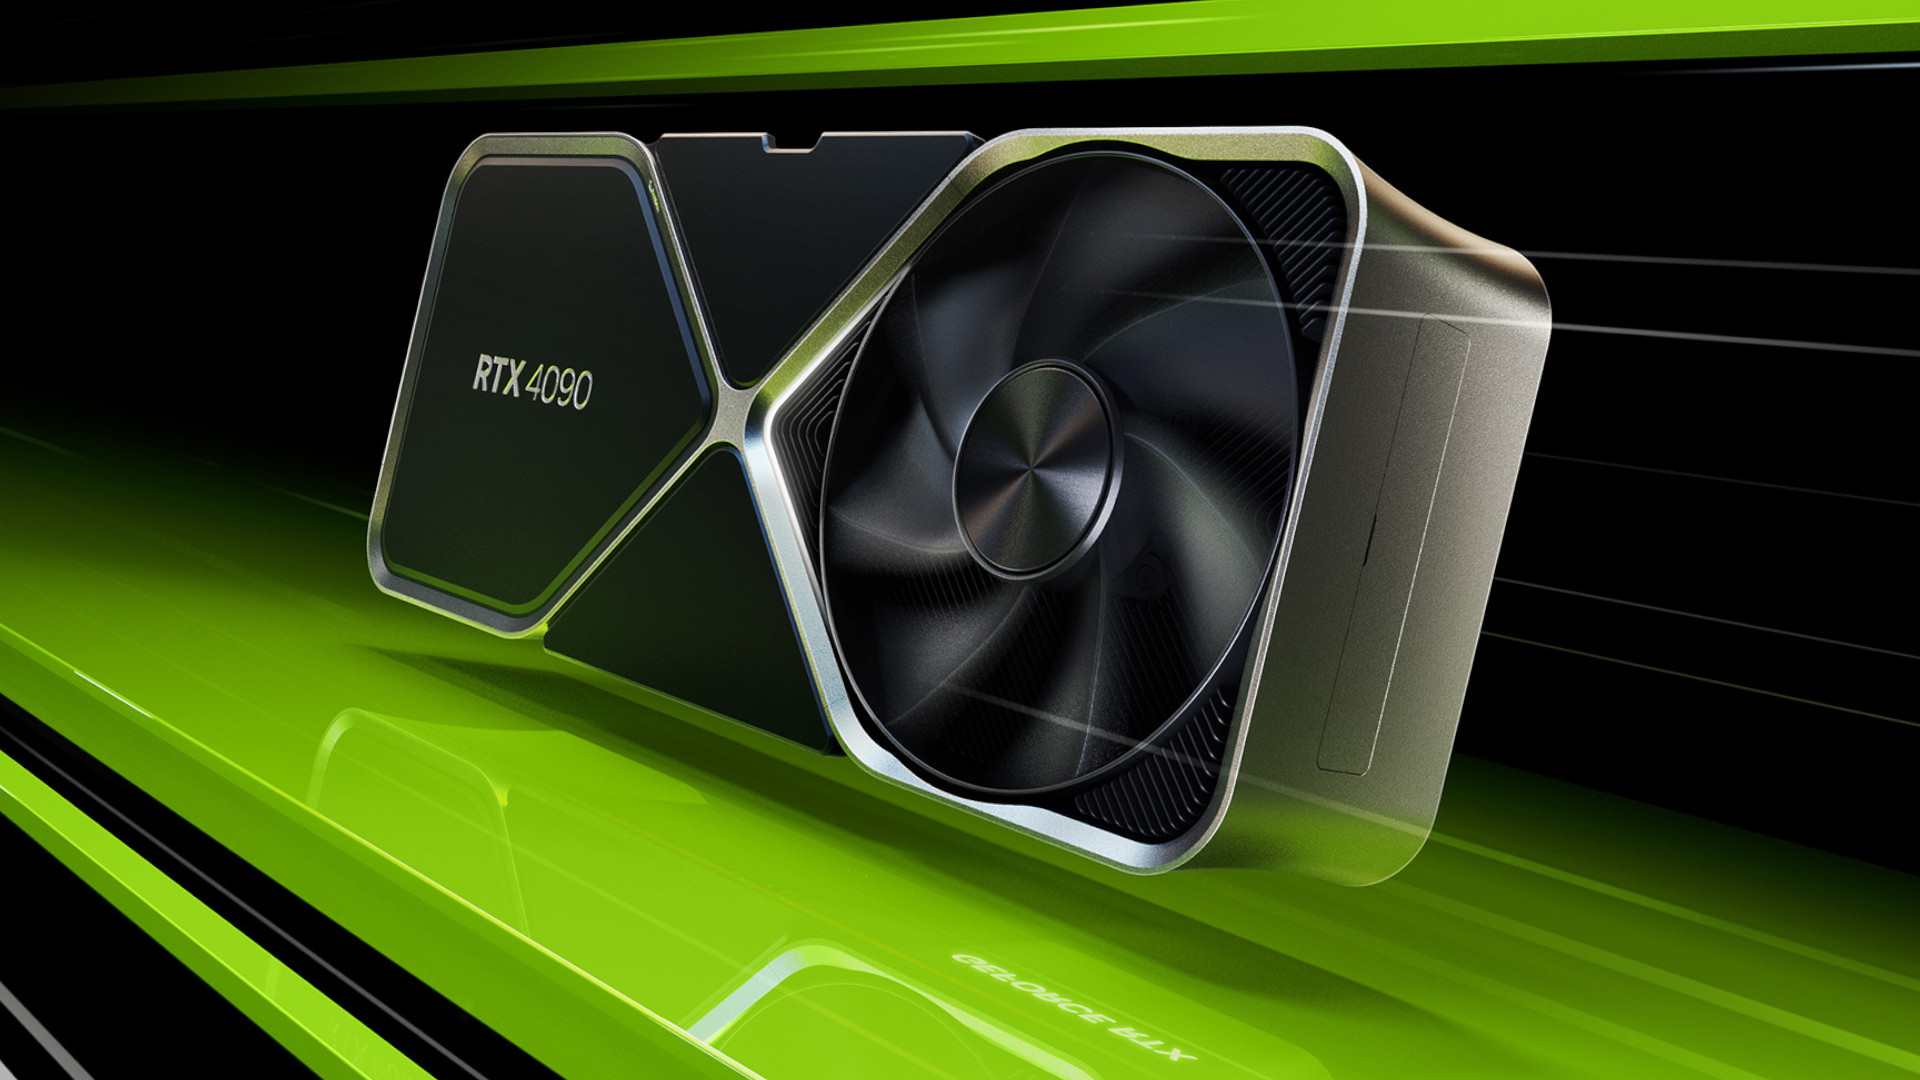 Nvidia RTX 4090 – release date, price, specs, and benchmarks